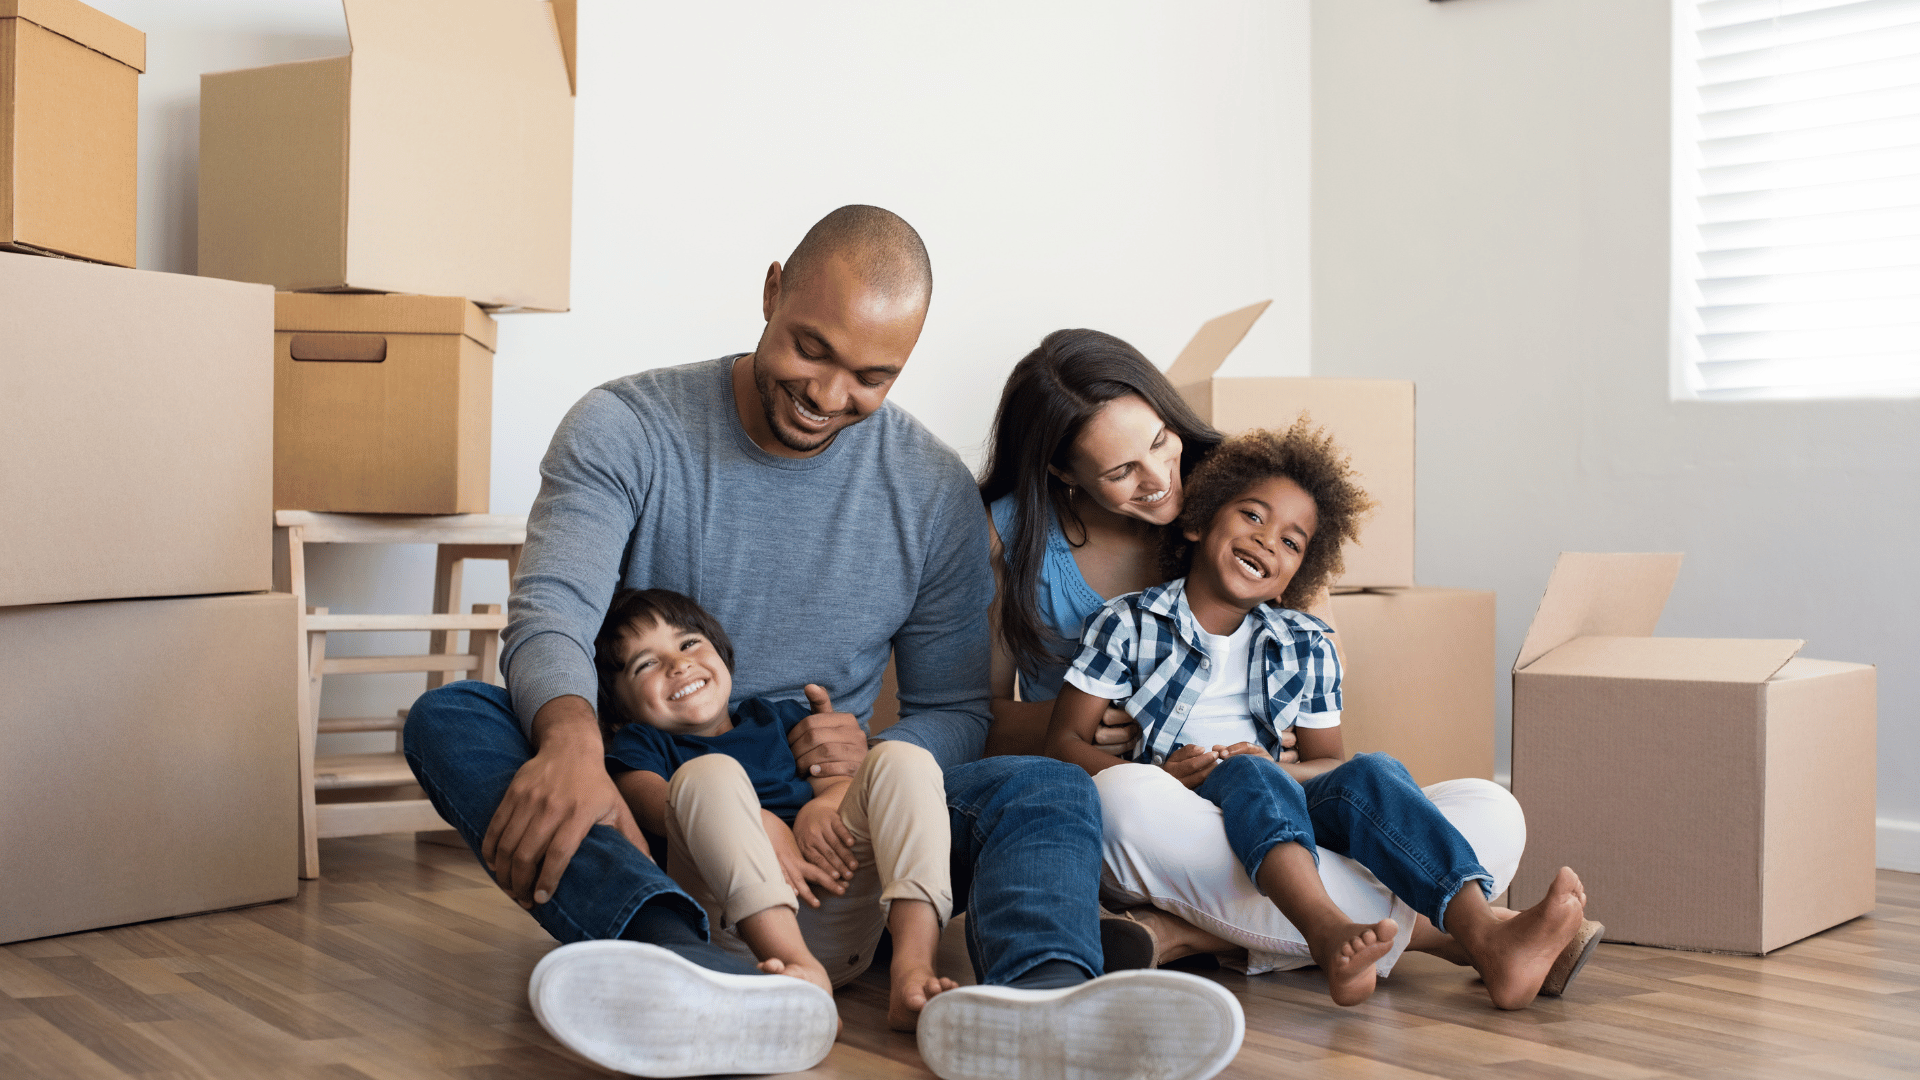 are you willing to relocate for work: a family sitting on the floor in an empty room with boxes around them